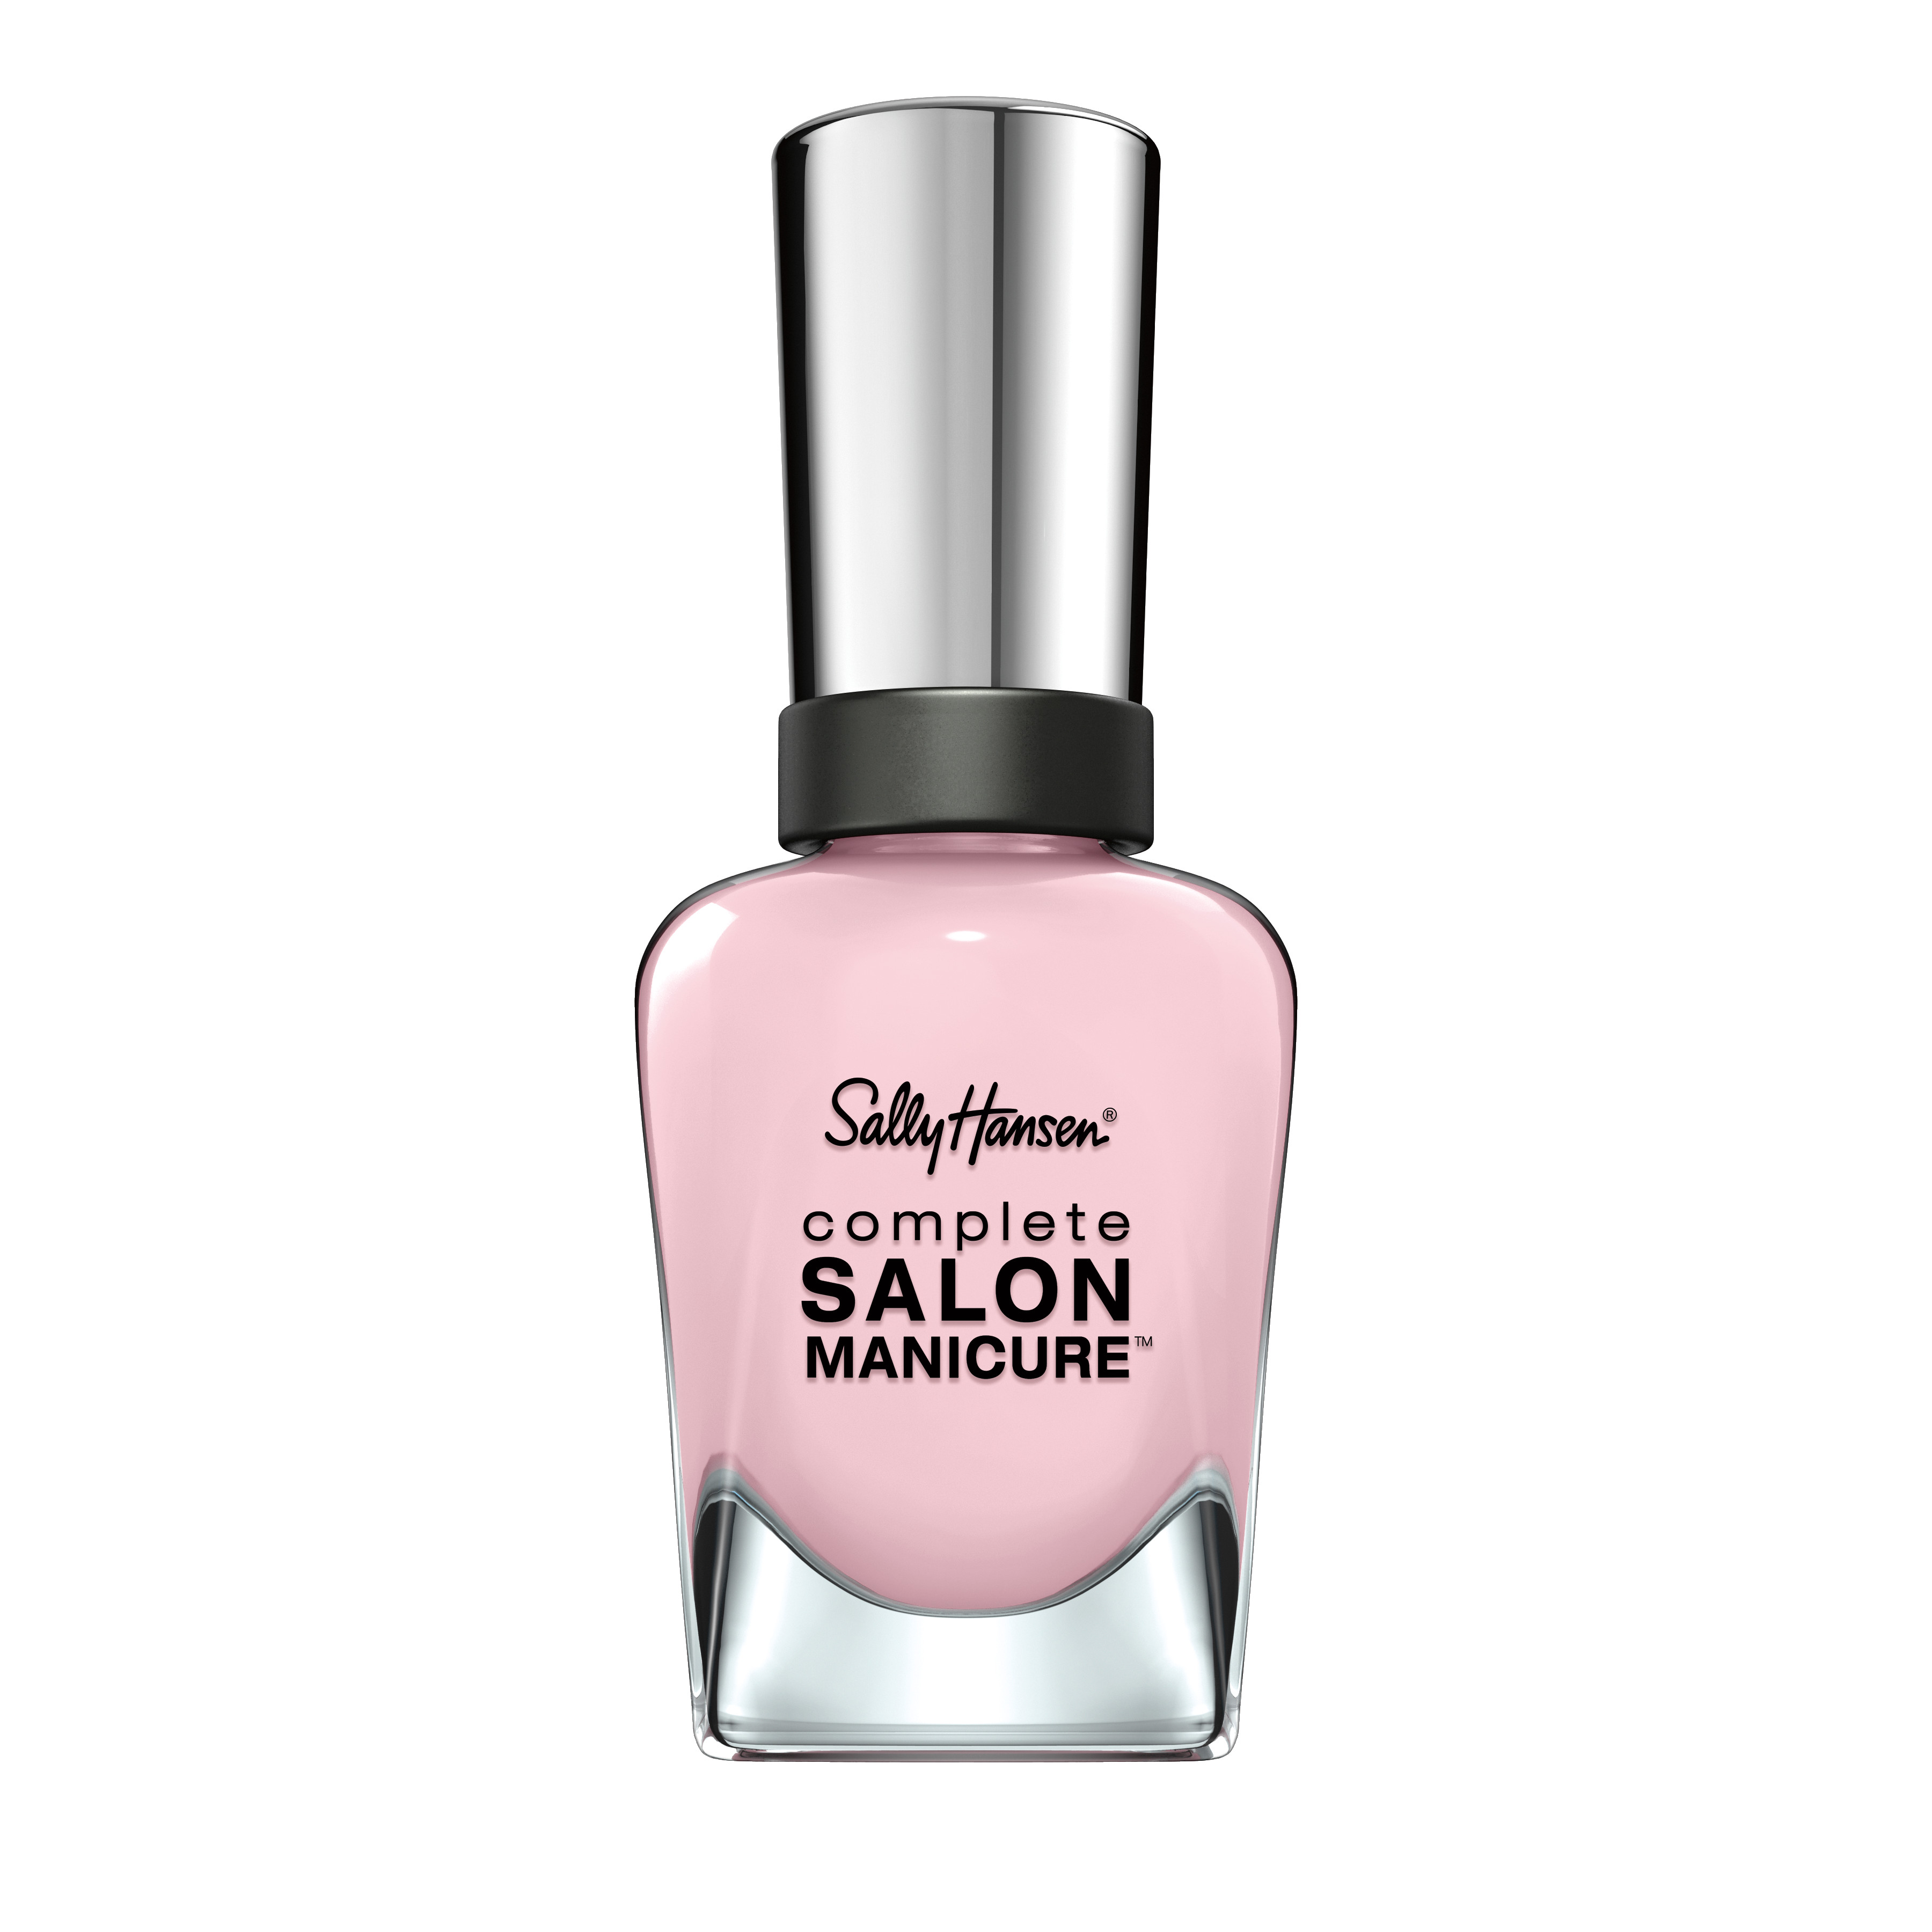 Sally Hansen Complete Salon Manicure Nail Color, Blush Against the World - image 1 of 2